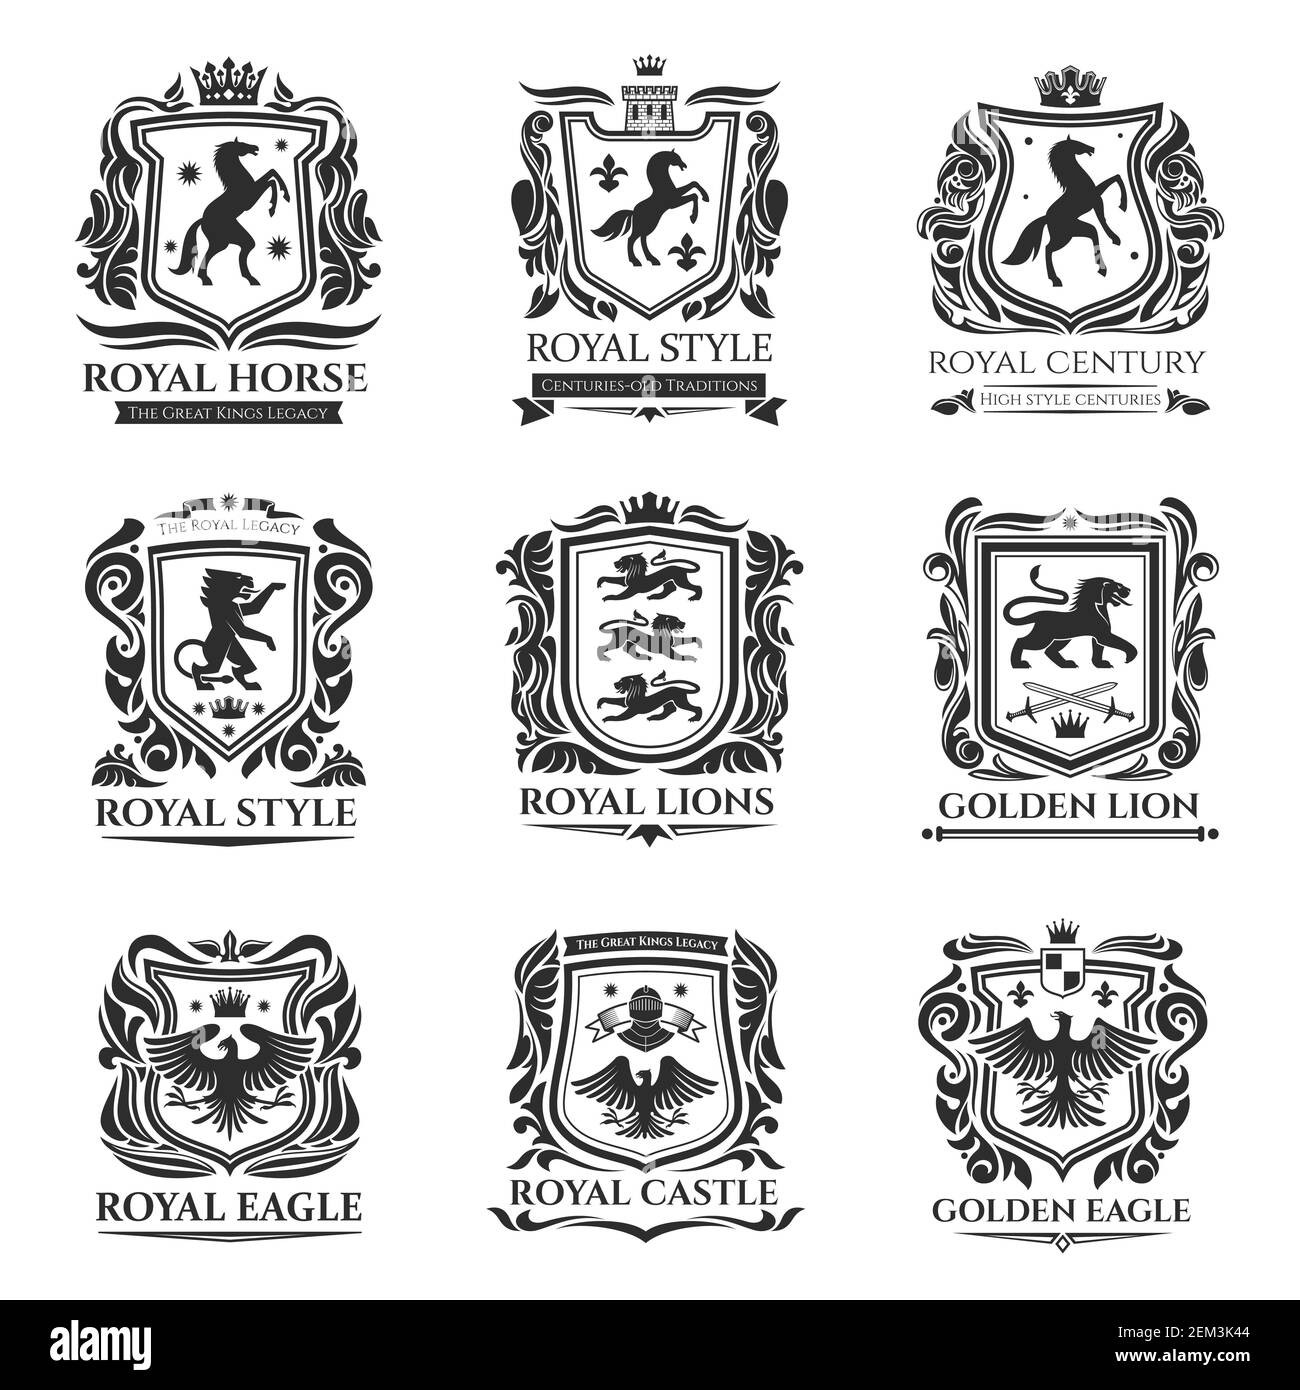 Heraldic shields, Medieval animals, Pegasus horse and royal floral emblems. Vector heraldic icons of Griffin lion with eagle wings, imperial crown, fl Stock Vector